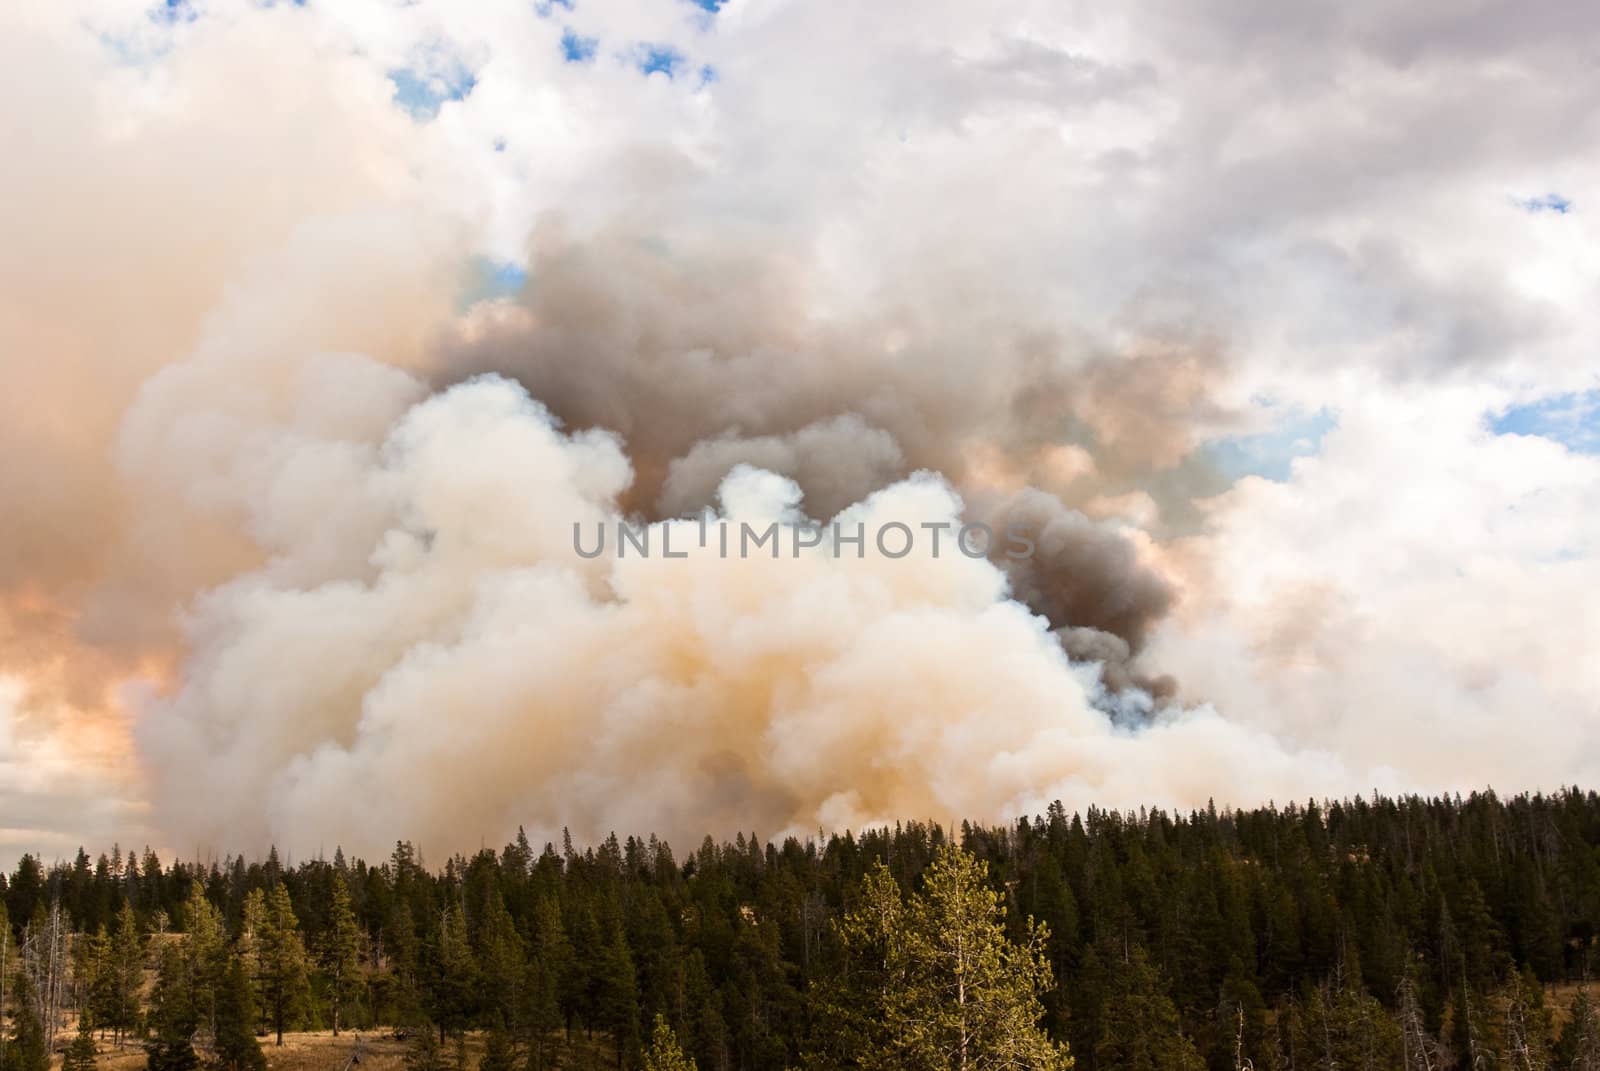 Massive clouds blow in wind of forest fire in Yellowstone